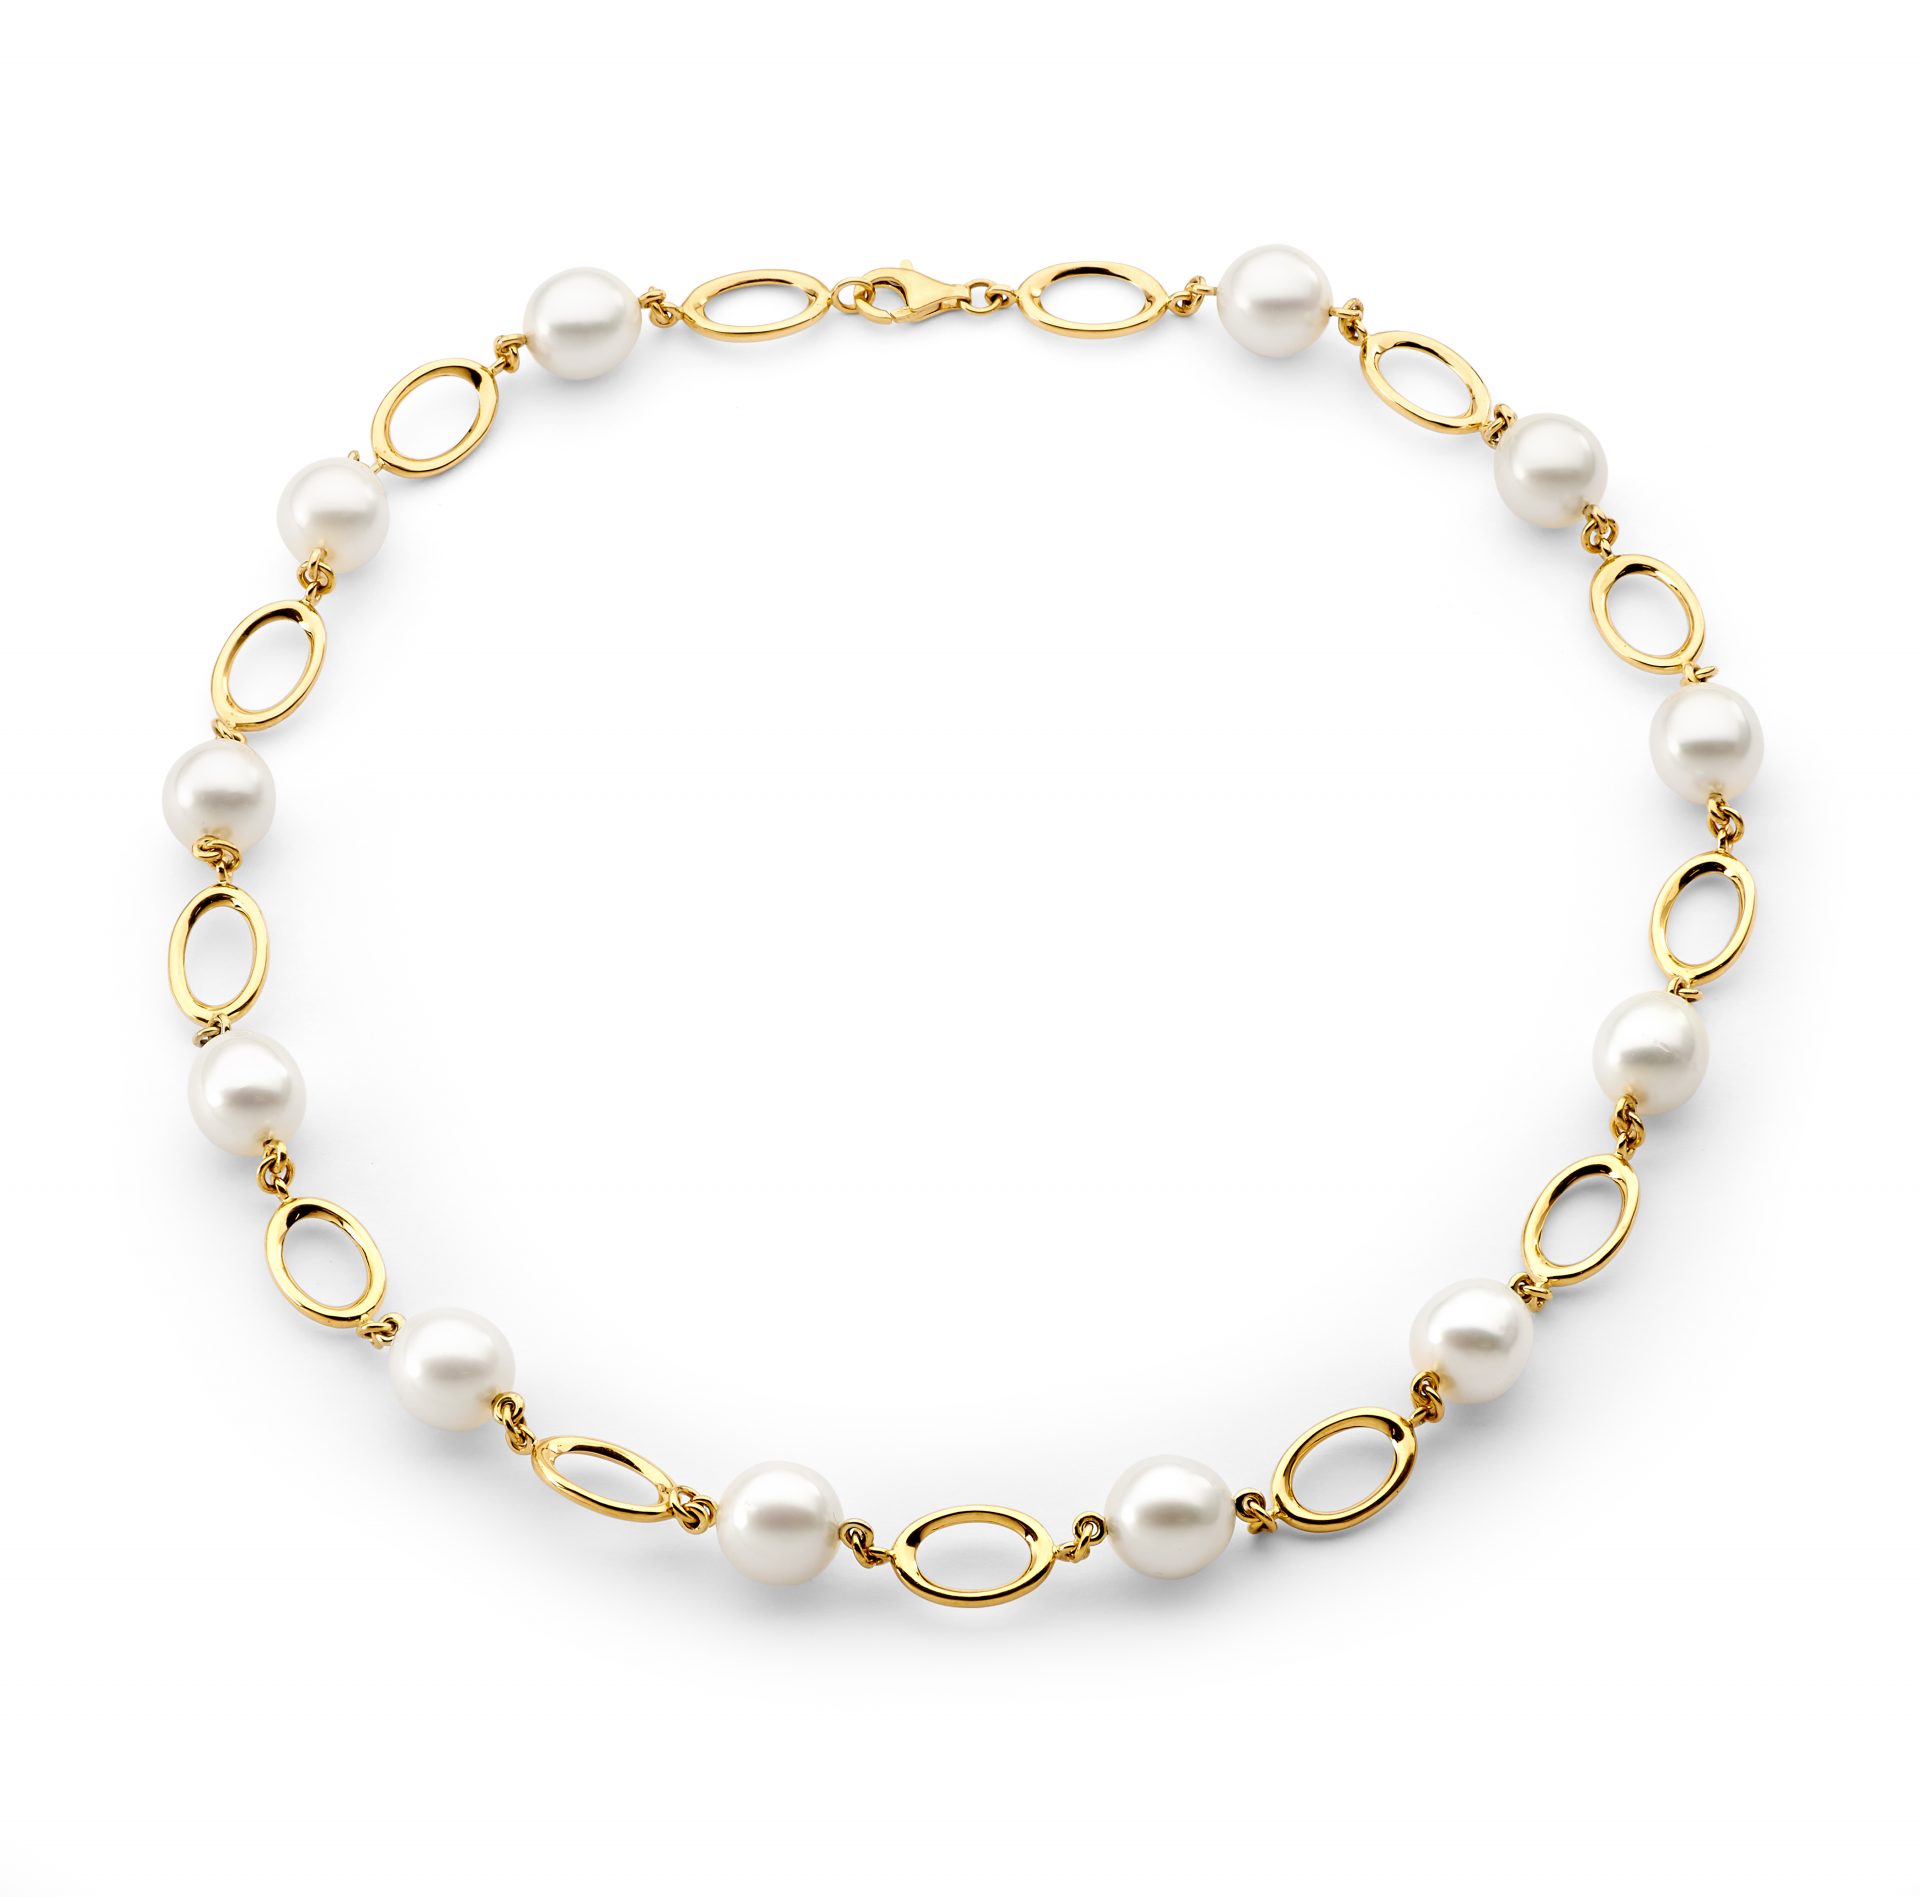 Elliptical Pearl Necklace - Allure South Sea Pearls